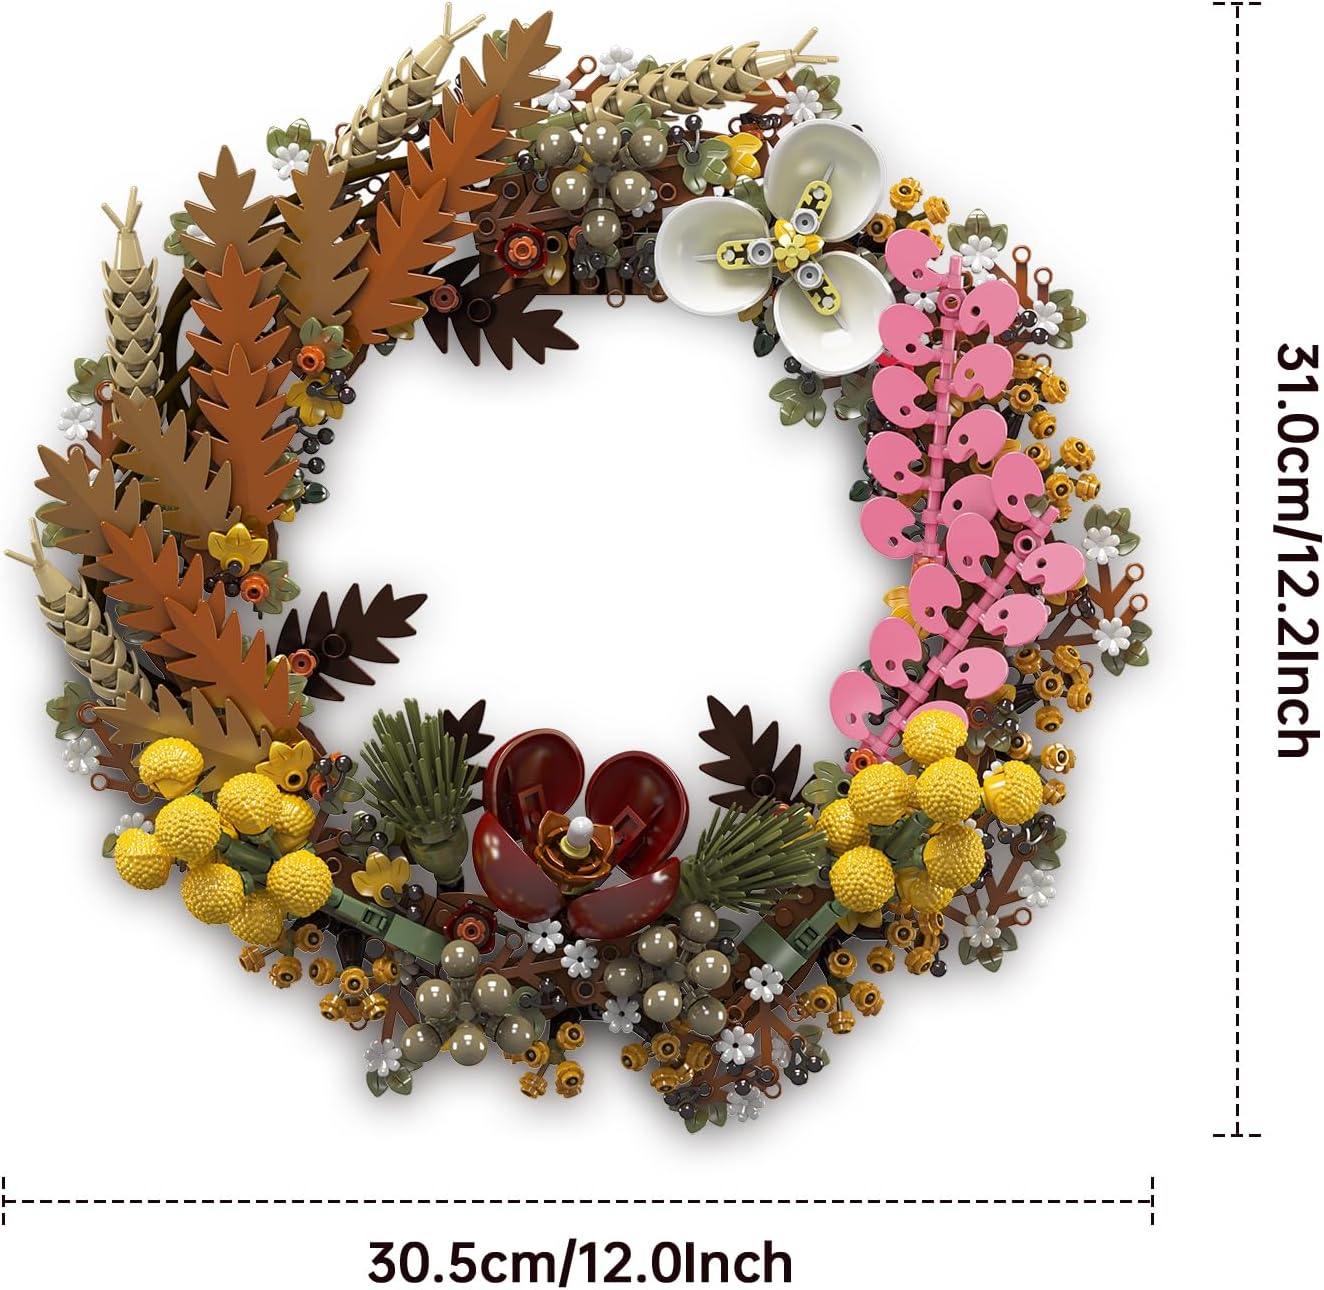 Christmas Wreath Mini Building Blocks Set with 1038 Pcs, dried flower wreath, Toys Christmas Collection Decoration Creative